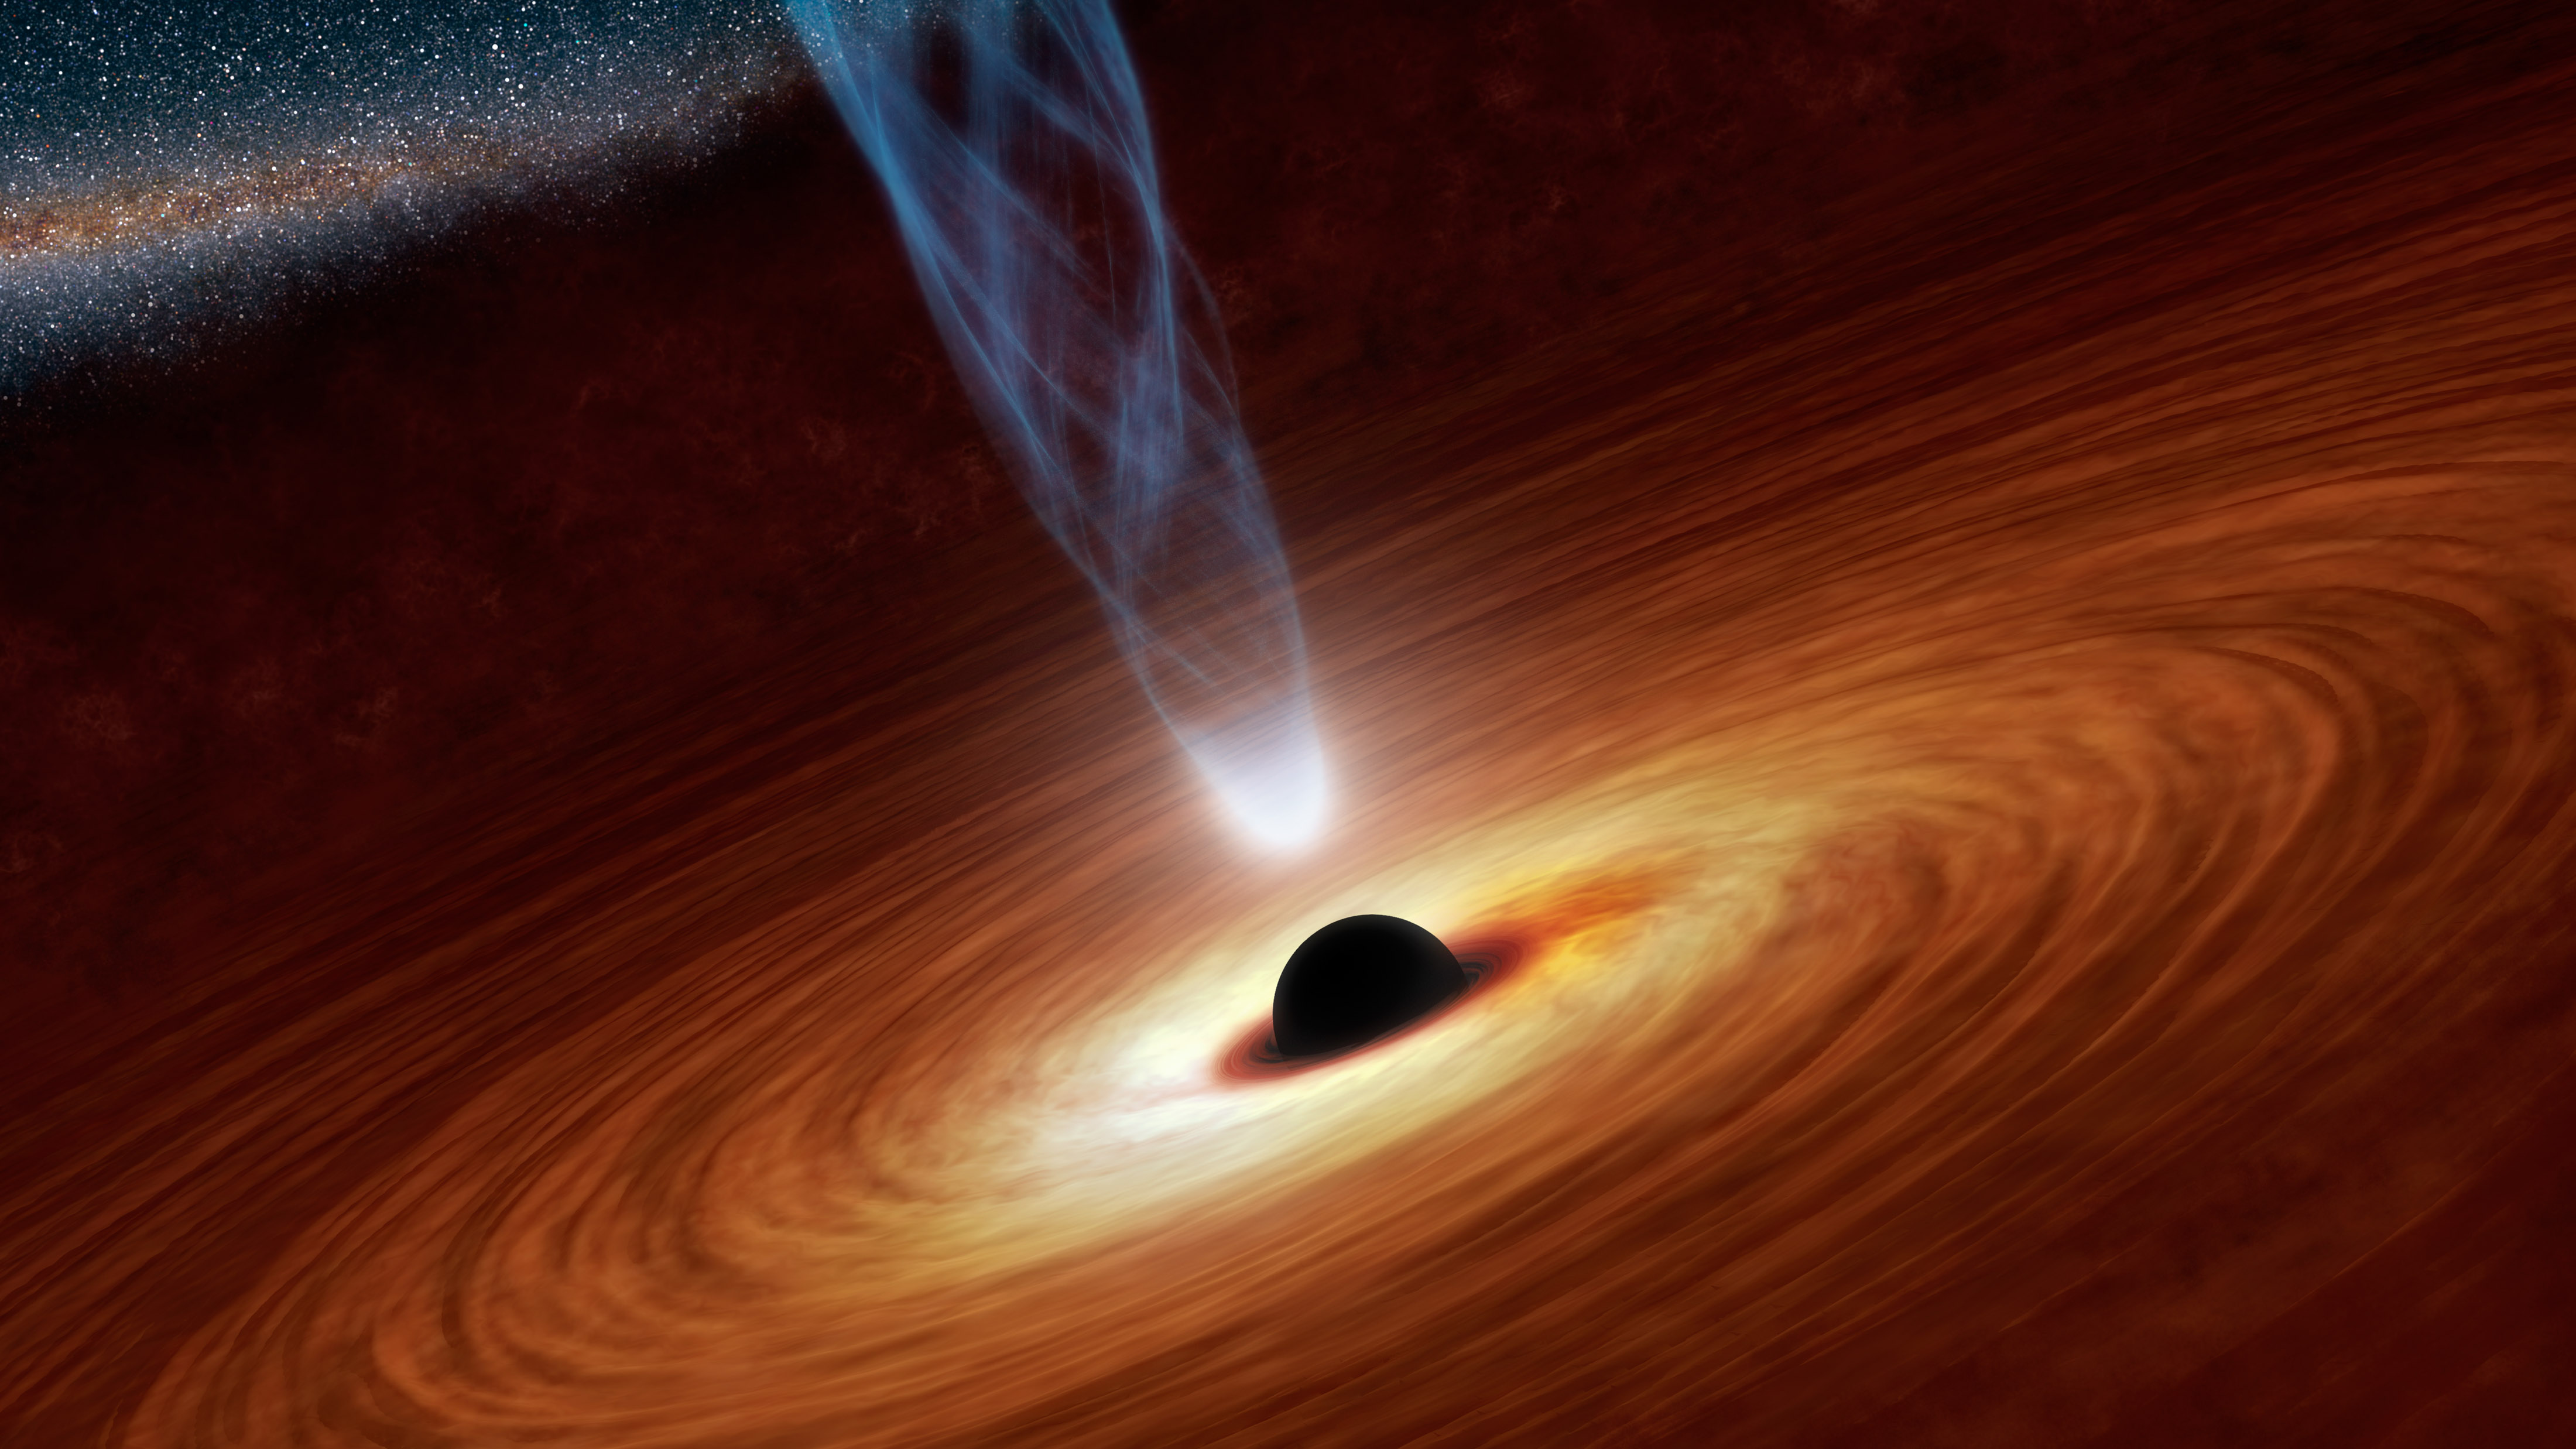 A collision of massive proportions: Astronomers discover a pair of titanic black holes that are heading for a collision